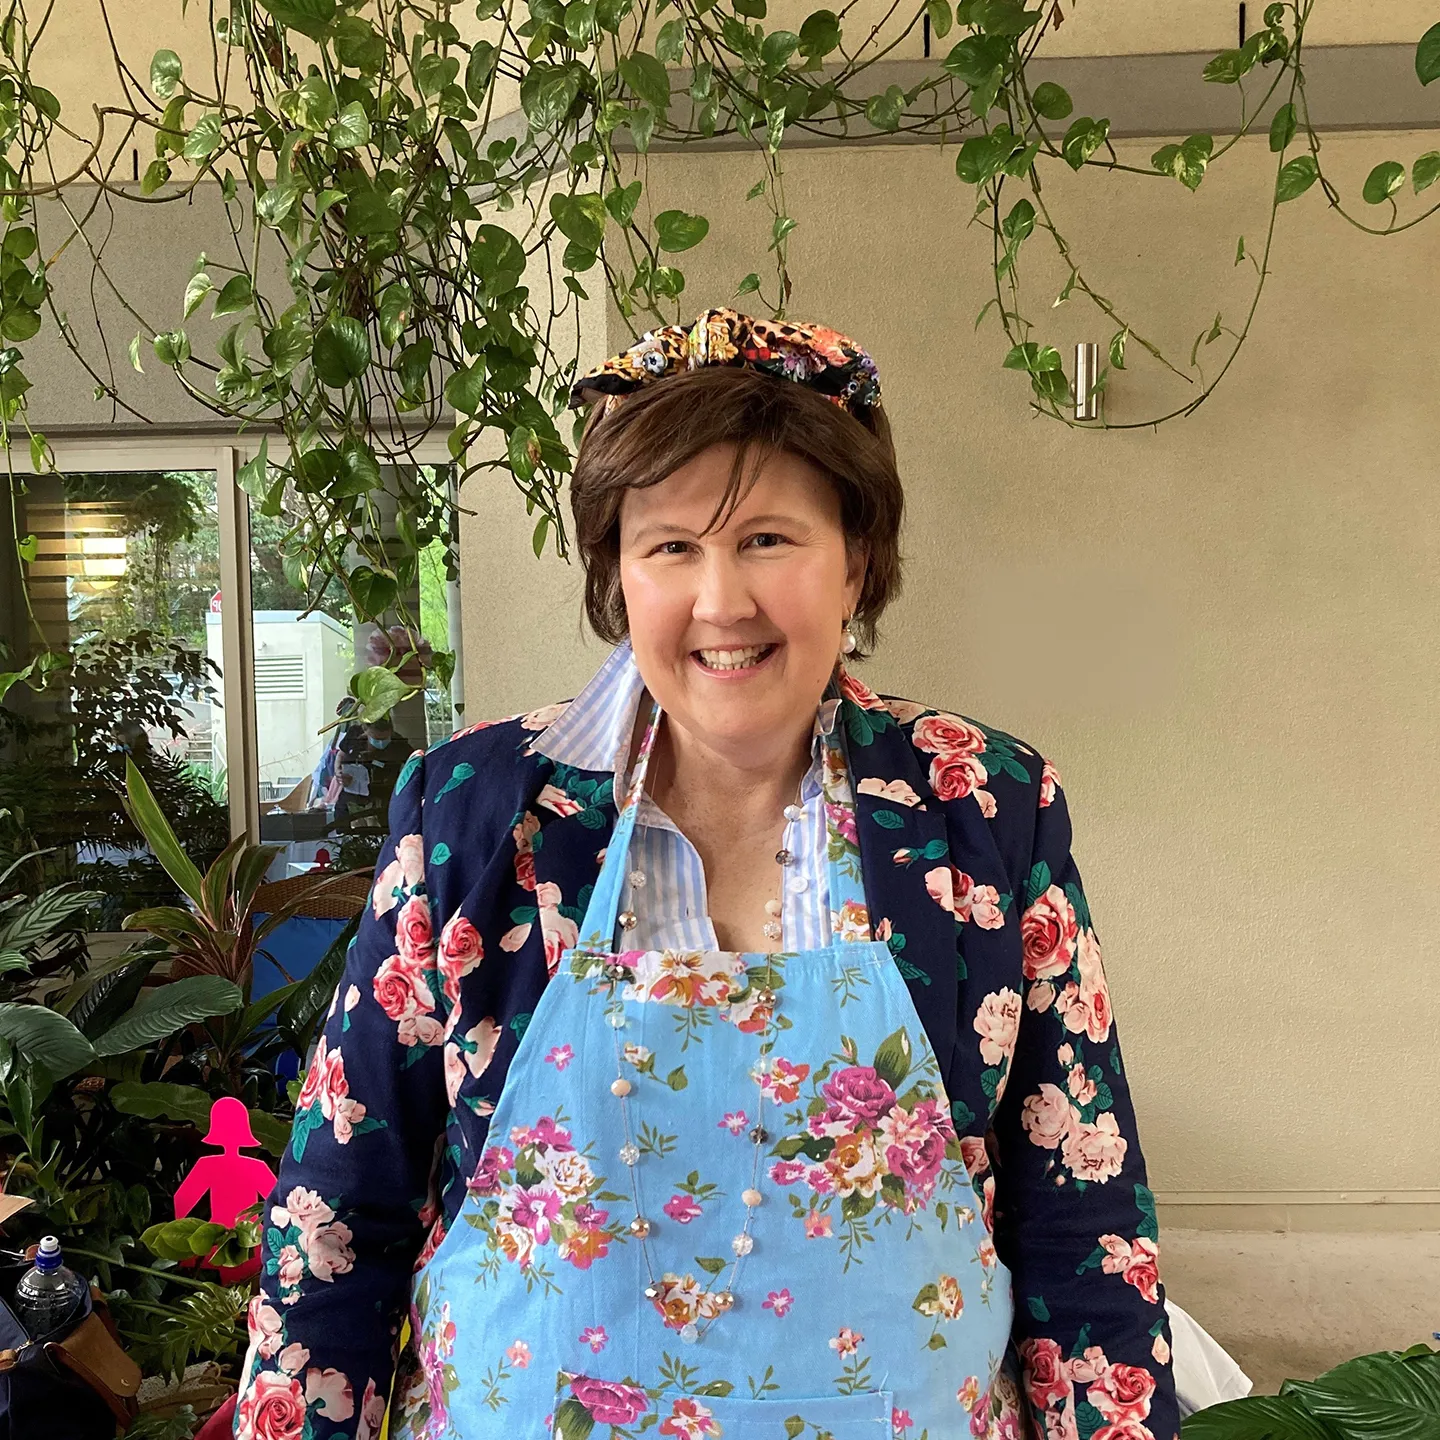 Ros has short, brown hair and is wearing a floral apron. She is smiling and looking straight at the camera.